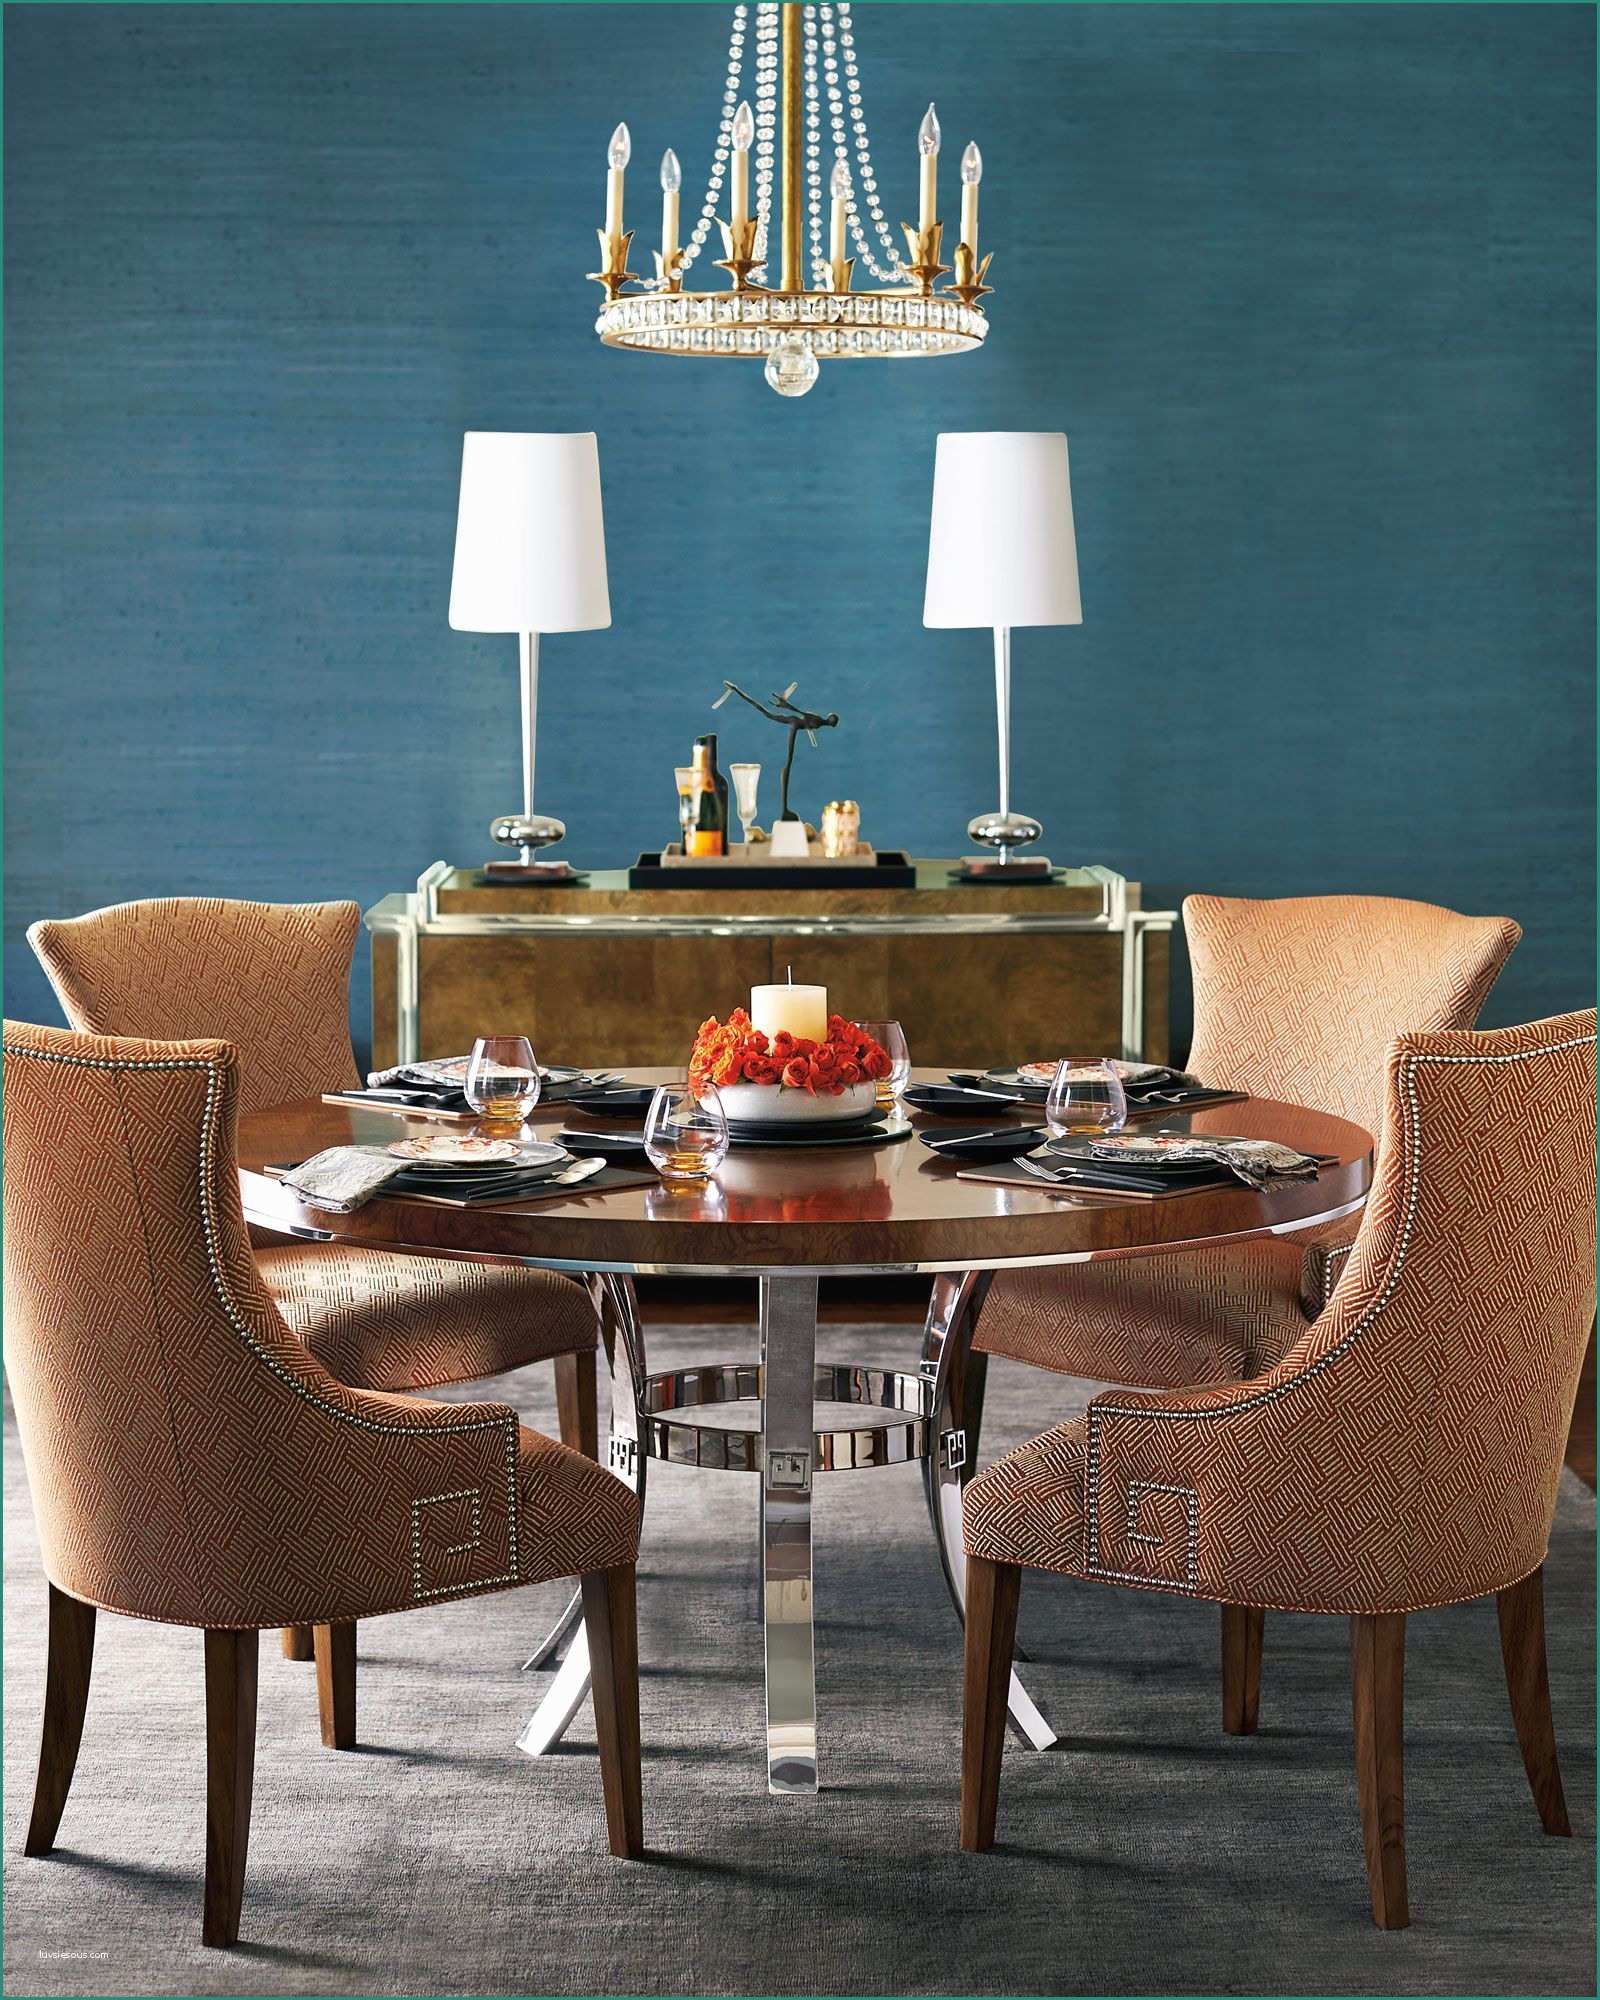 Sedie Moderne Bianche E soho Luxe Dining Room Bernhardt Ideas for the House